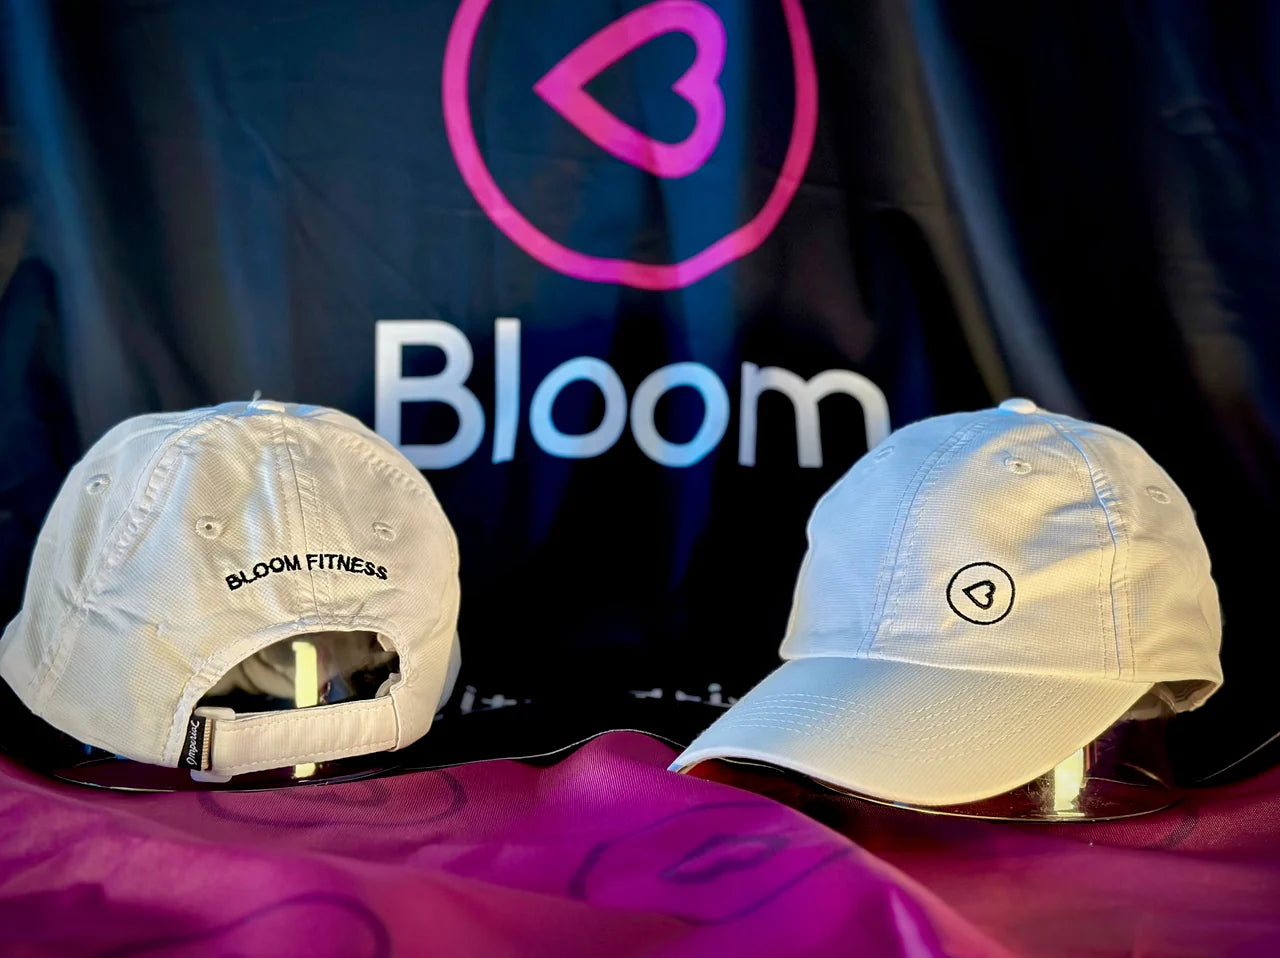 Bloom fitted cap